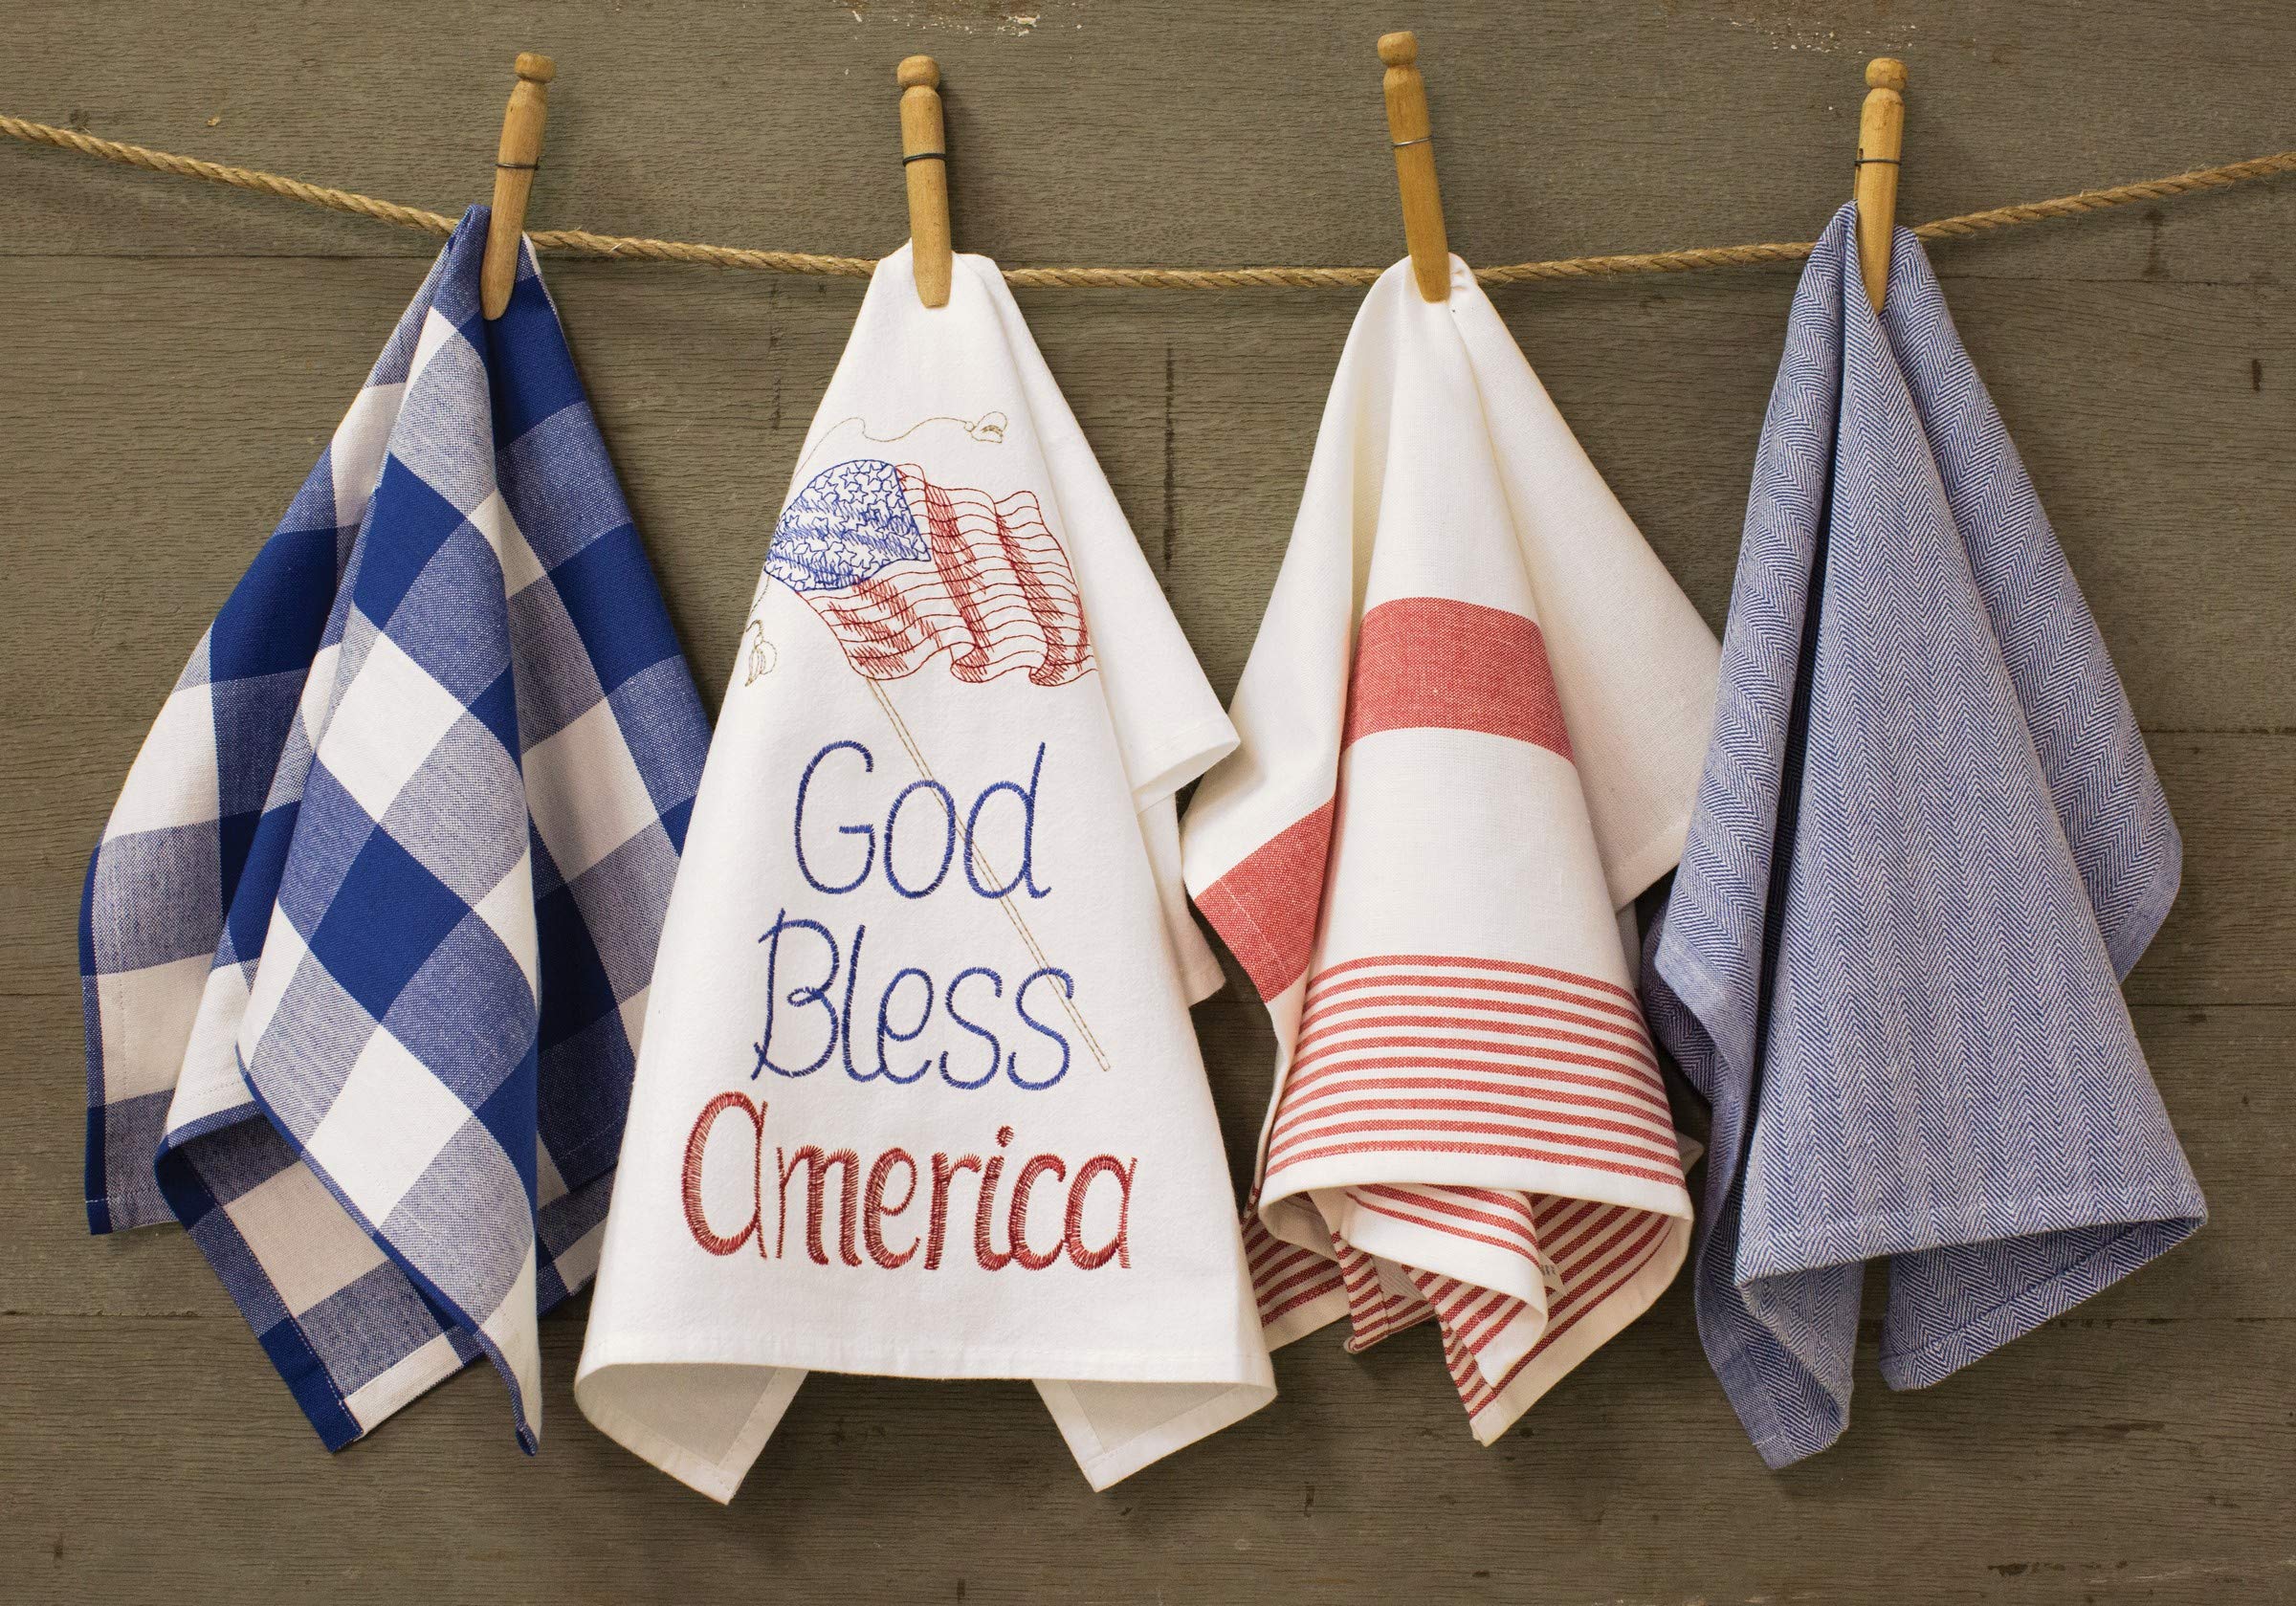 C&F Home God Bless America Flour Sack Kitchen Patriotic Red White Blue American Fourth of July Memorial Labor Day Towel Decor Decoration U.S.A. Independence Day Memorial Day Americana 18" x 27" White